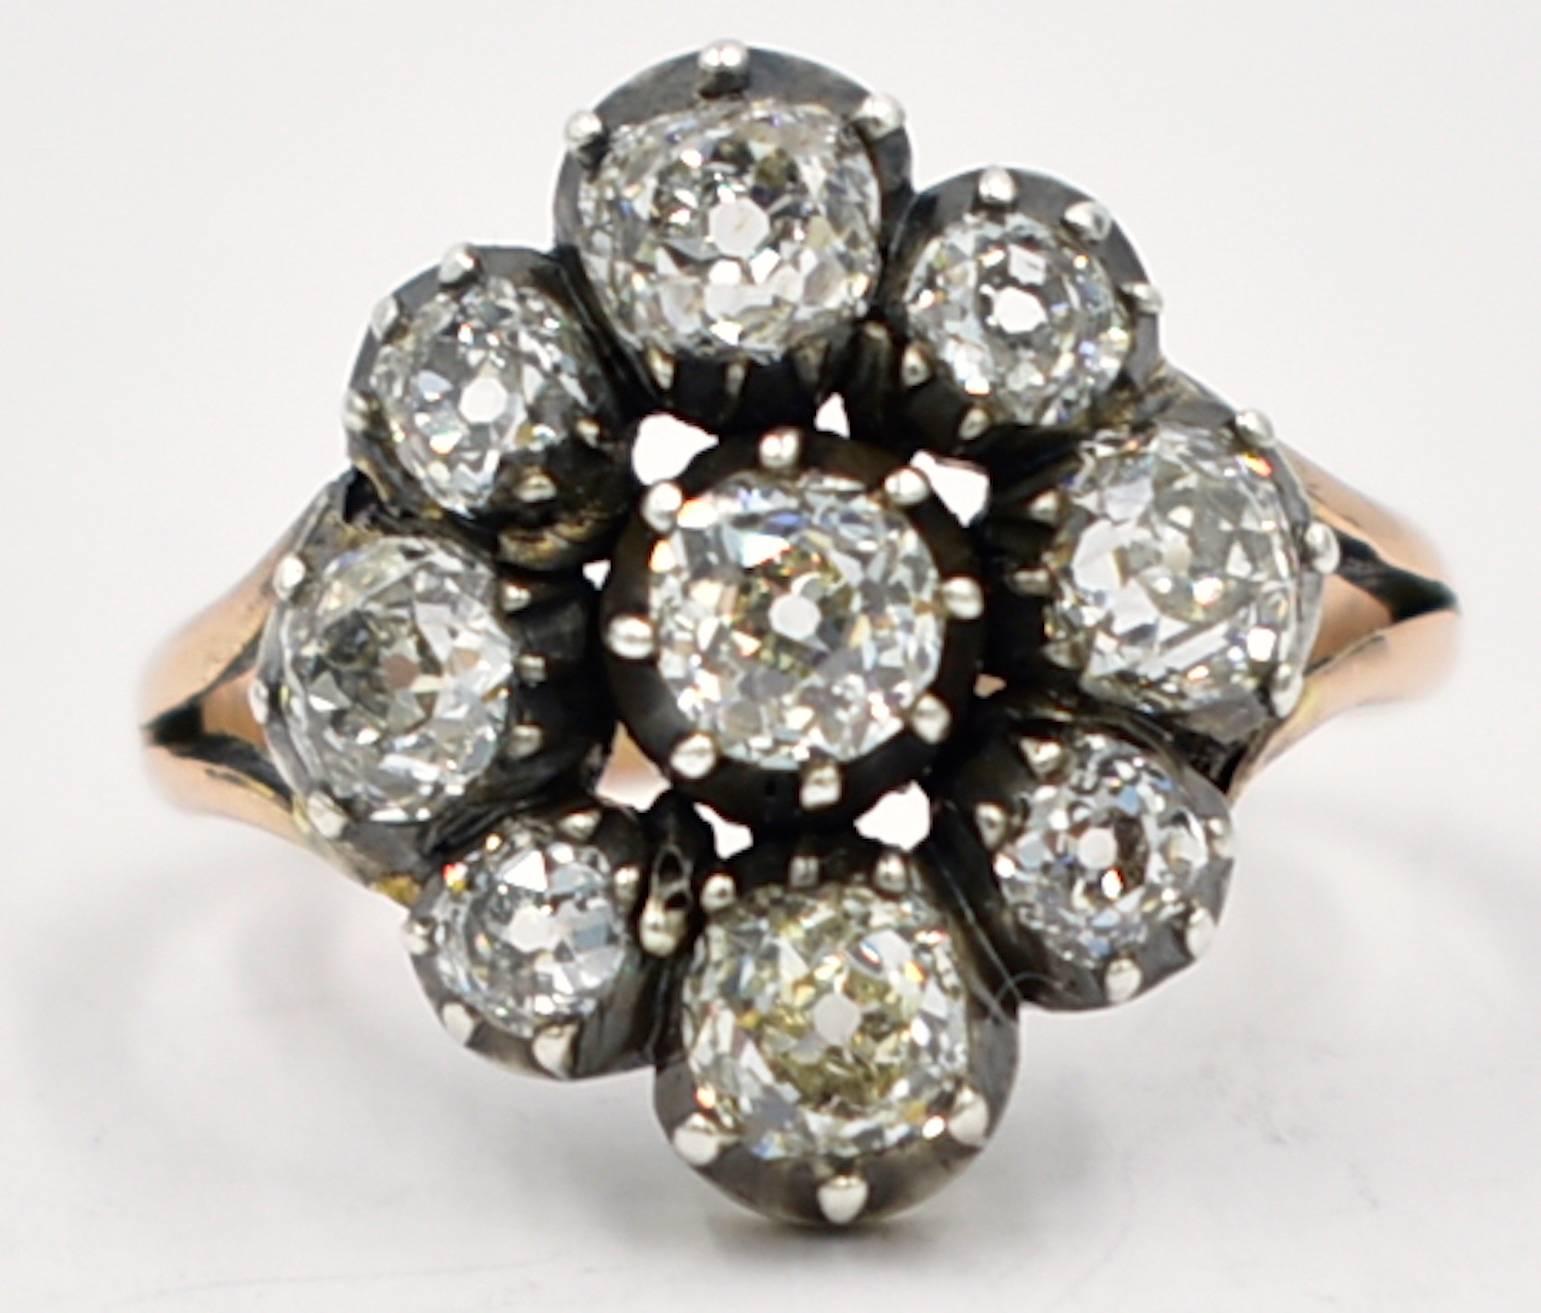 Impressive Georgian diamond cluster ring with nine full cut diamonds in a silver open back setting with an 18K gold band dating to c. 1820. The pictures speak for themselves. The ring is a size 6.